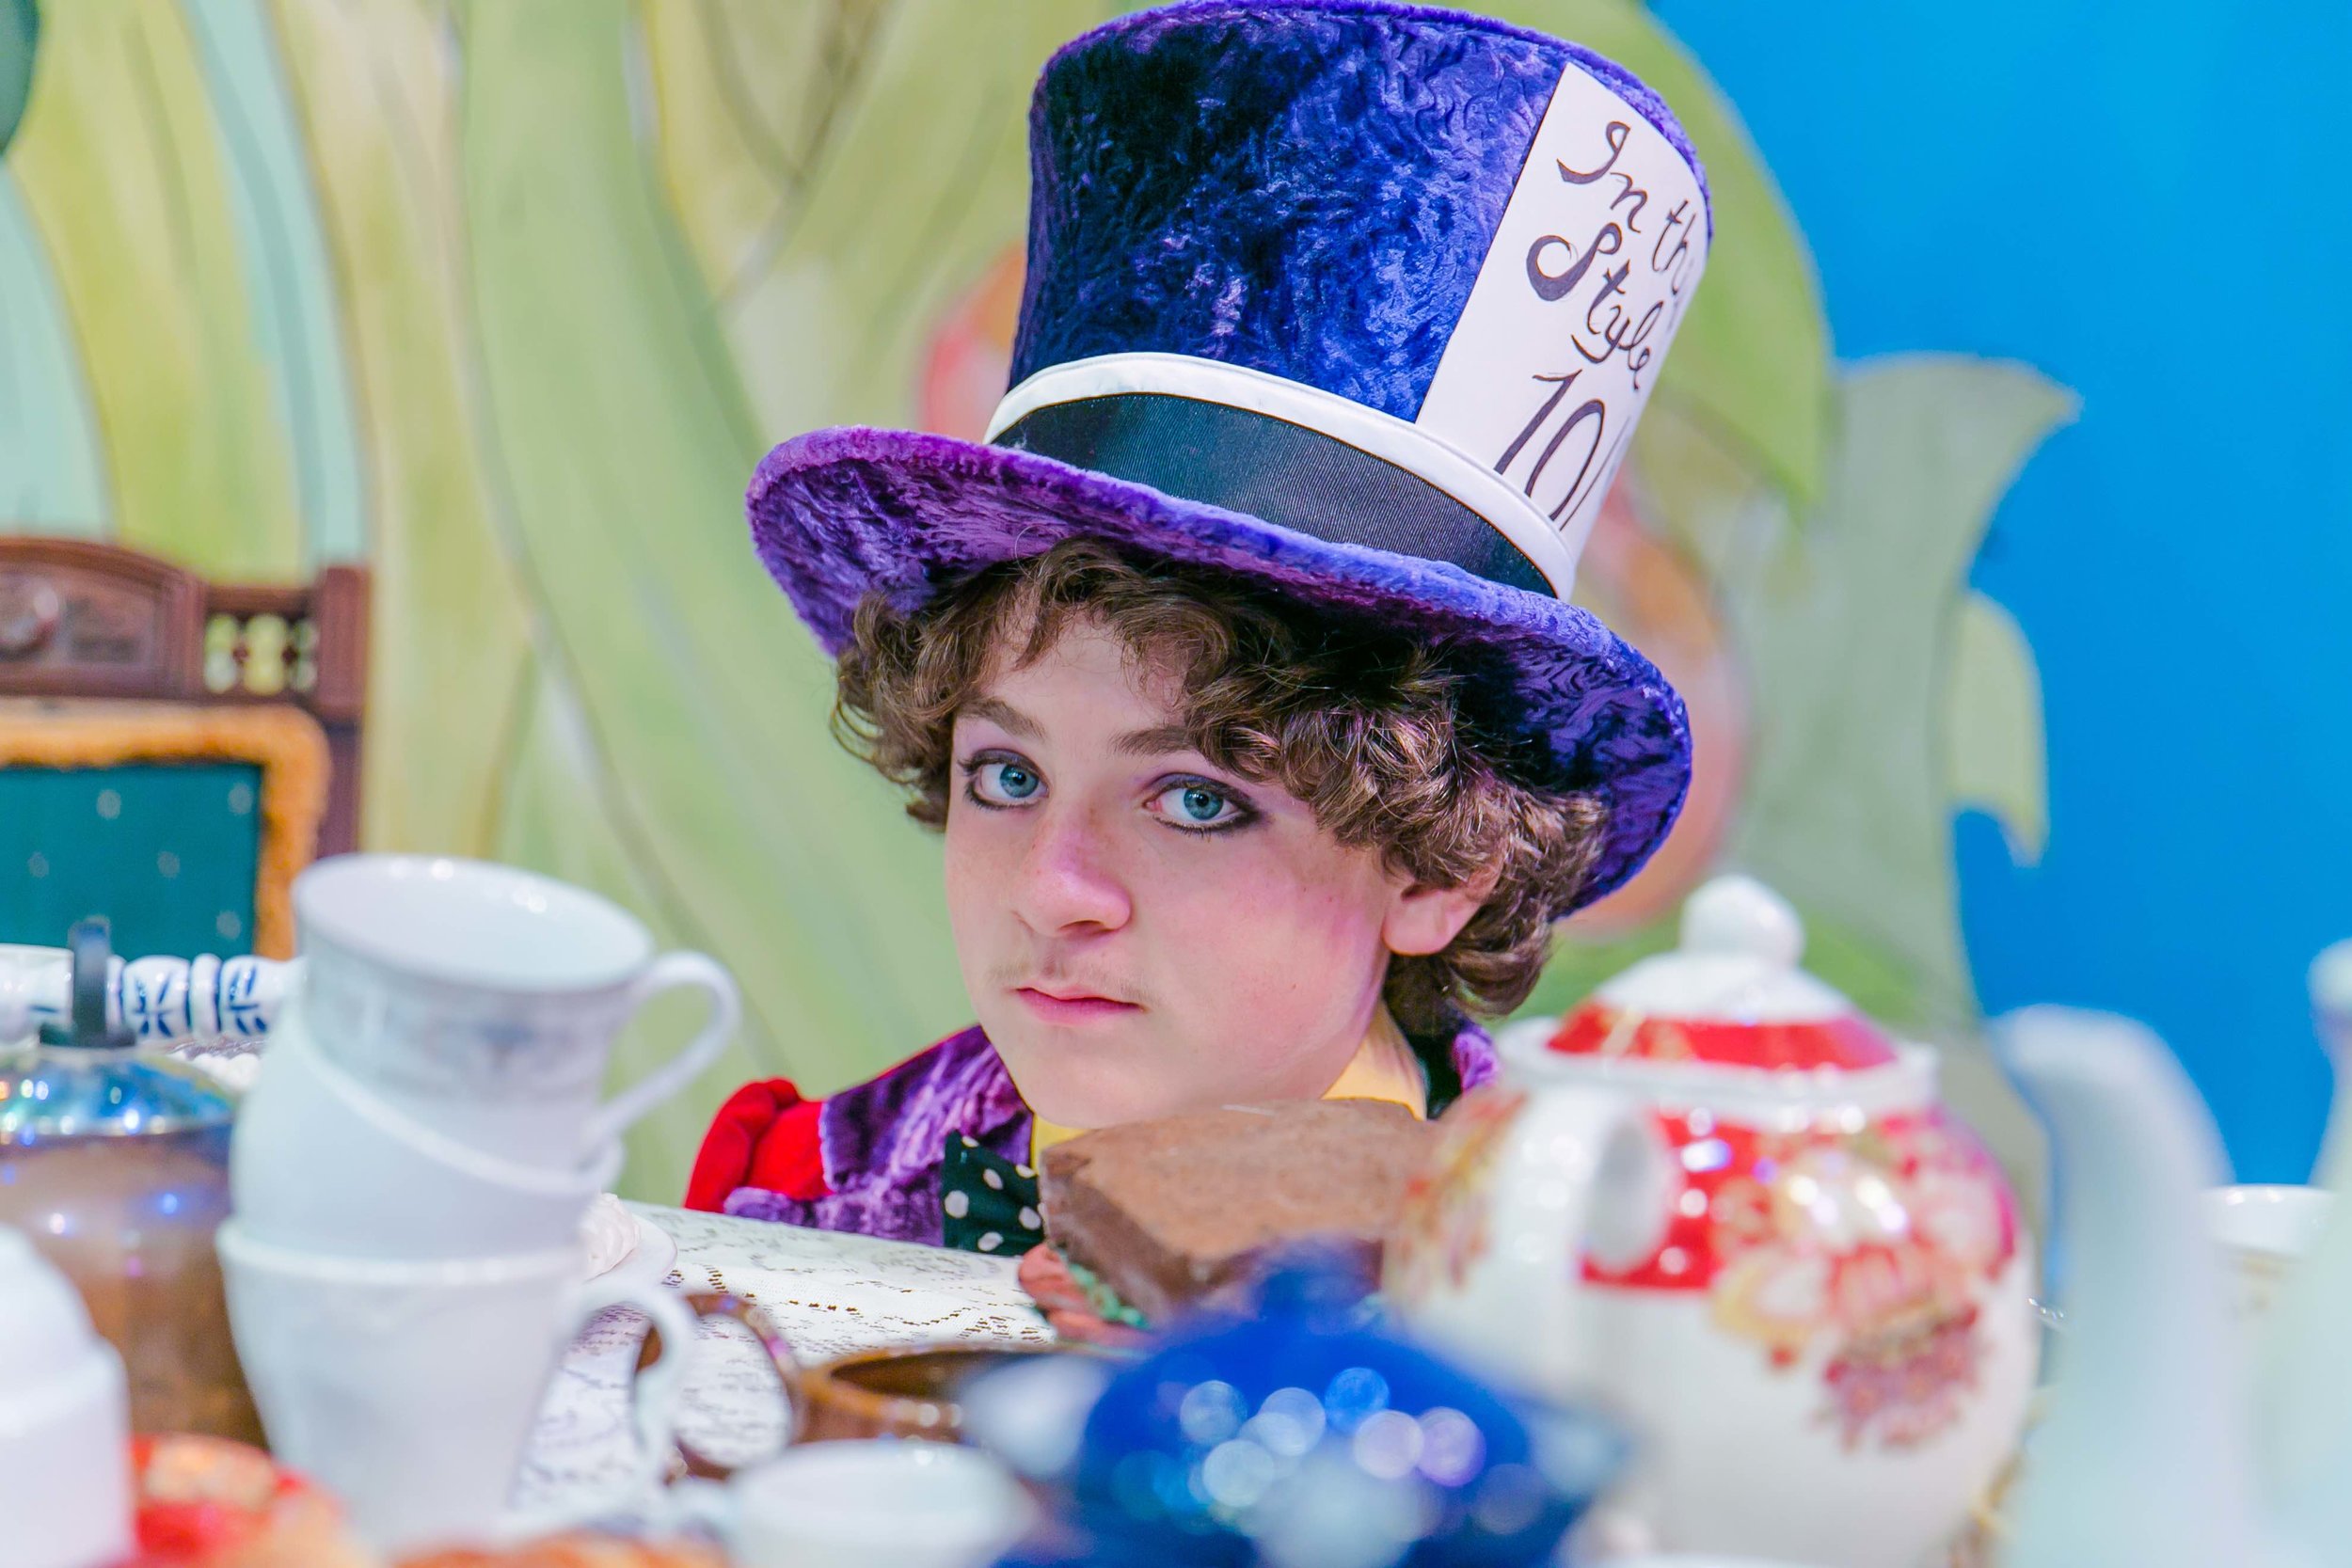  Costumes and Hat by Jennifer Gonsalves  Palo Alto Children's Theatre  Alice in Wonderland, 2014  Photo by Tina Case 